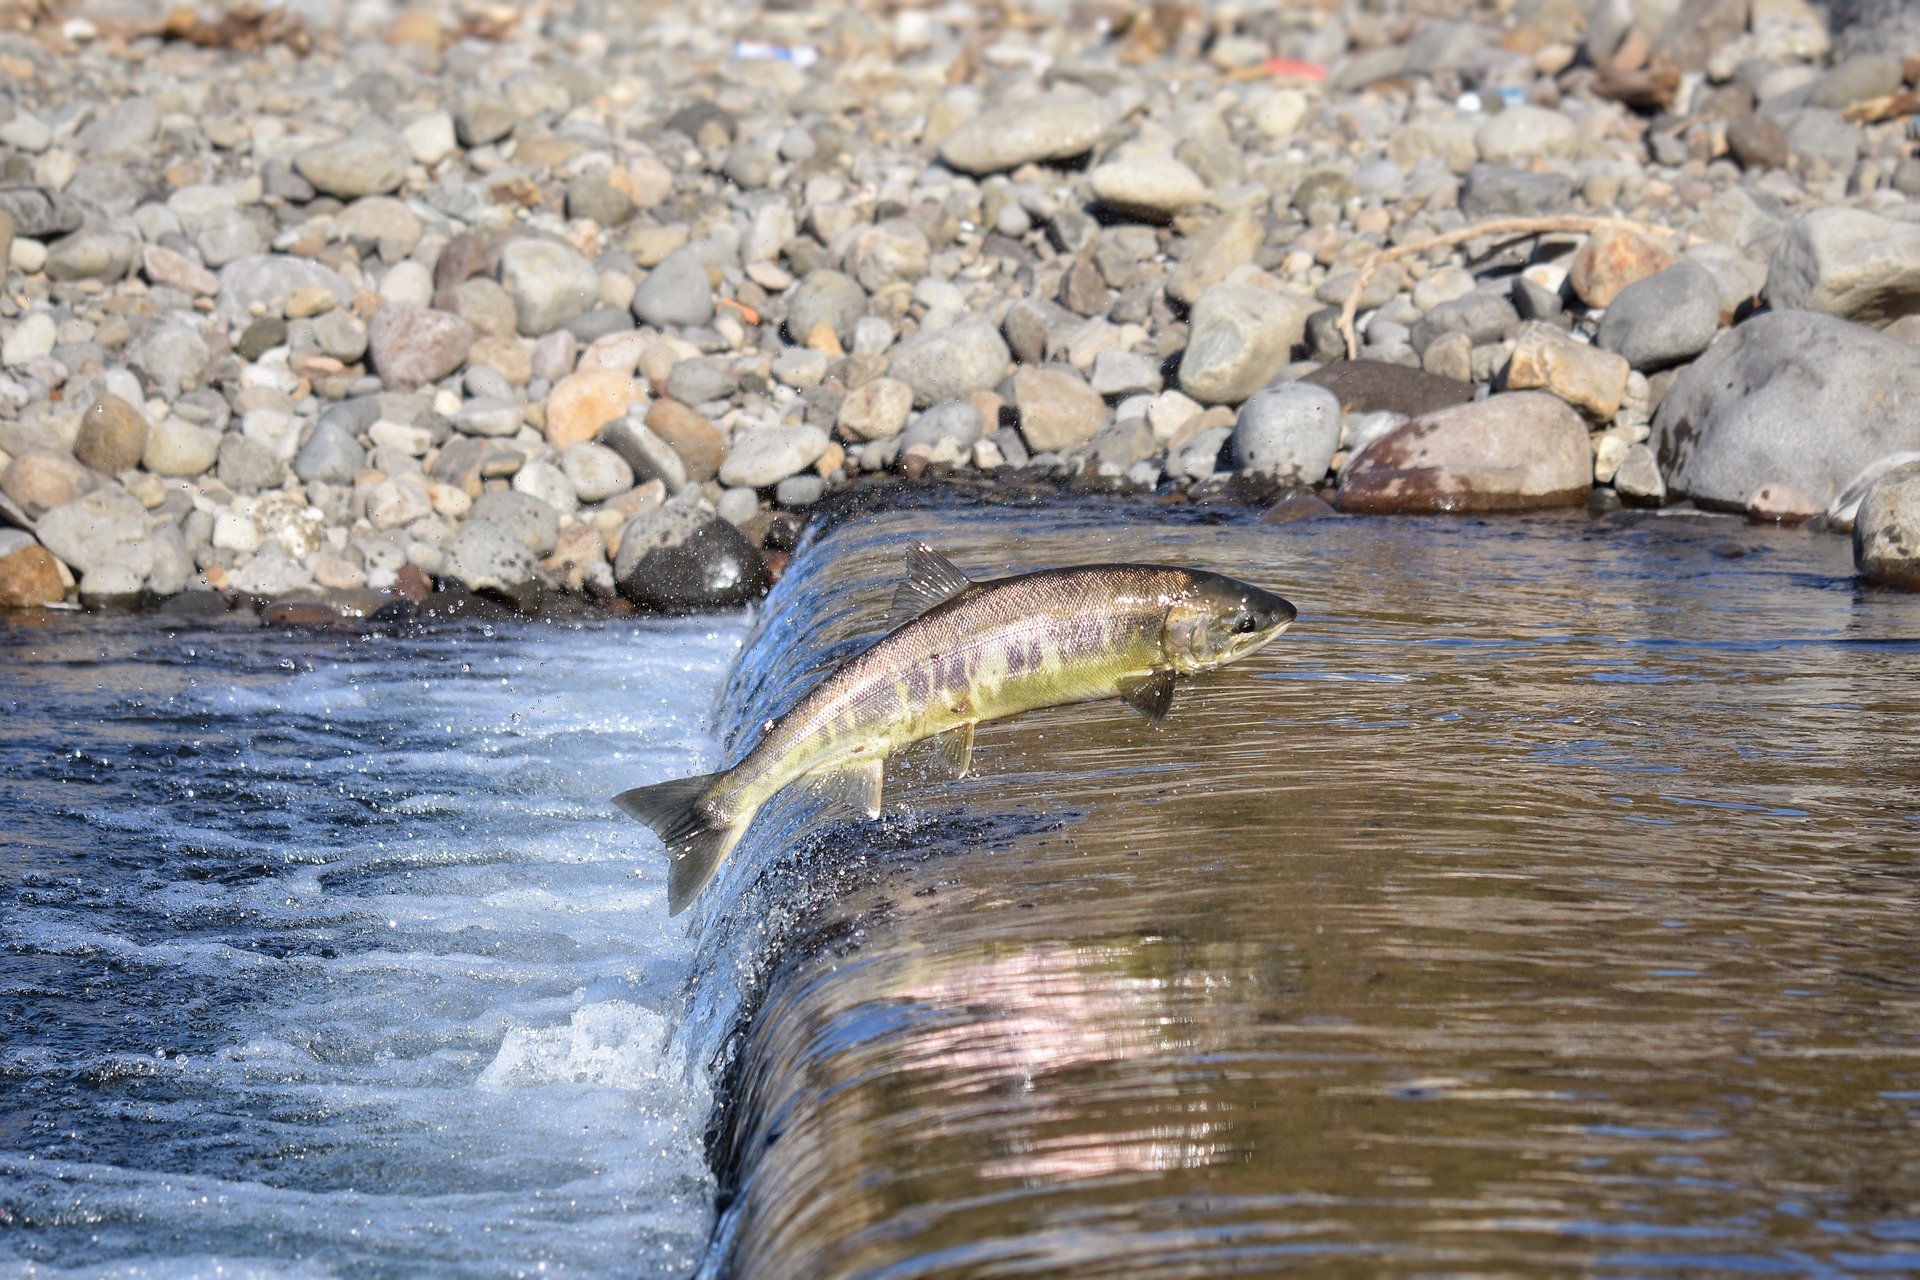 ‘Brown Tags’ conservation regulations come into force for Salmon Anglers on Lower River Lee in Cork